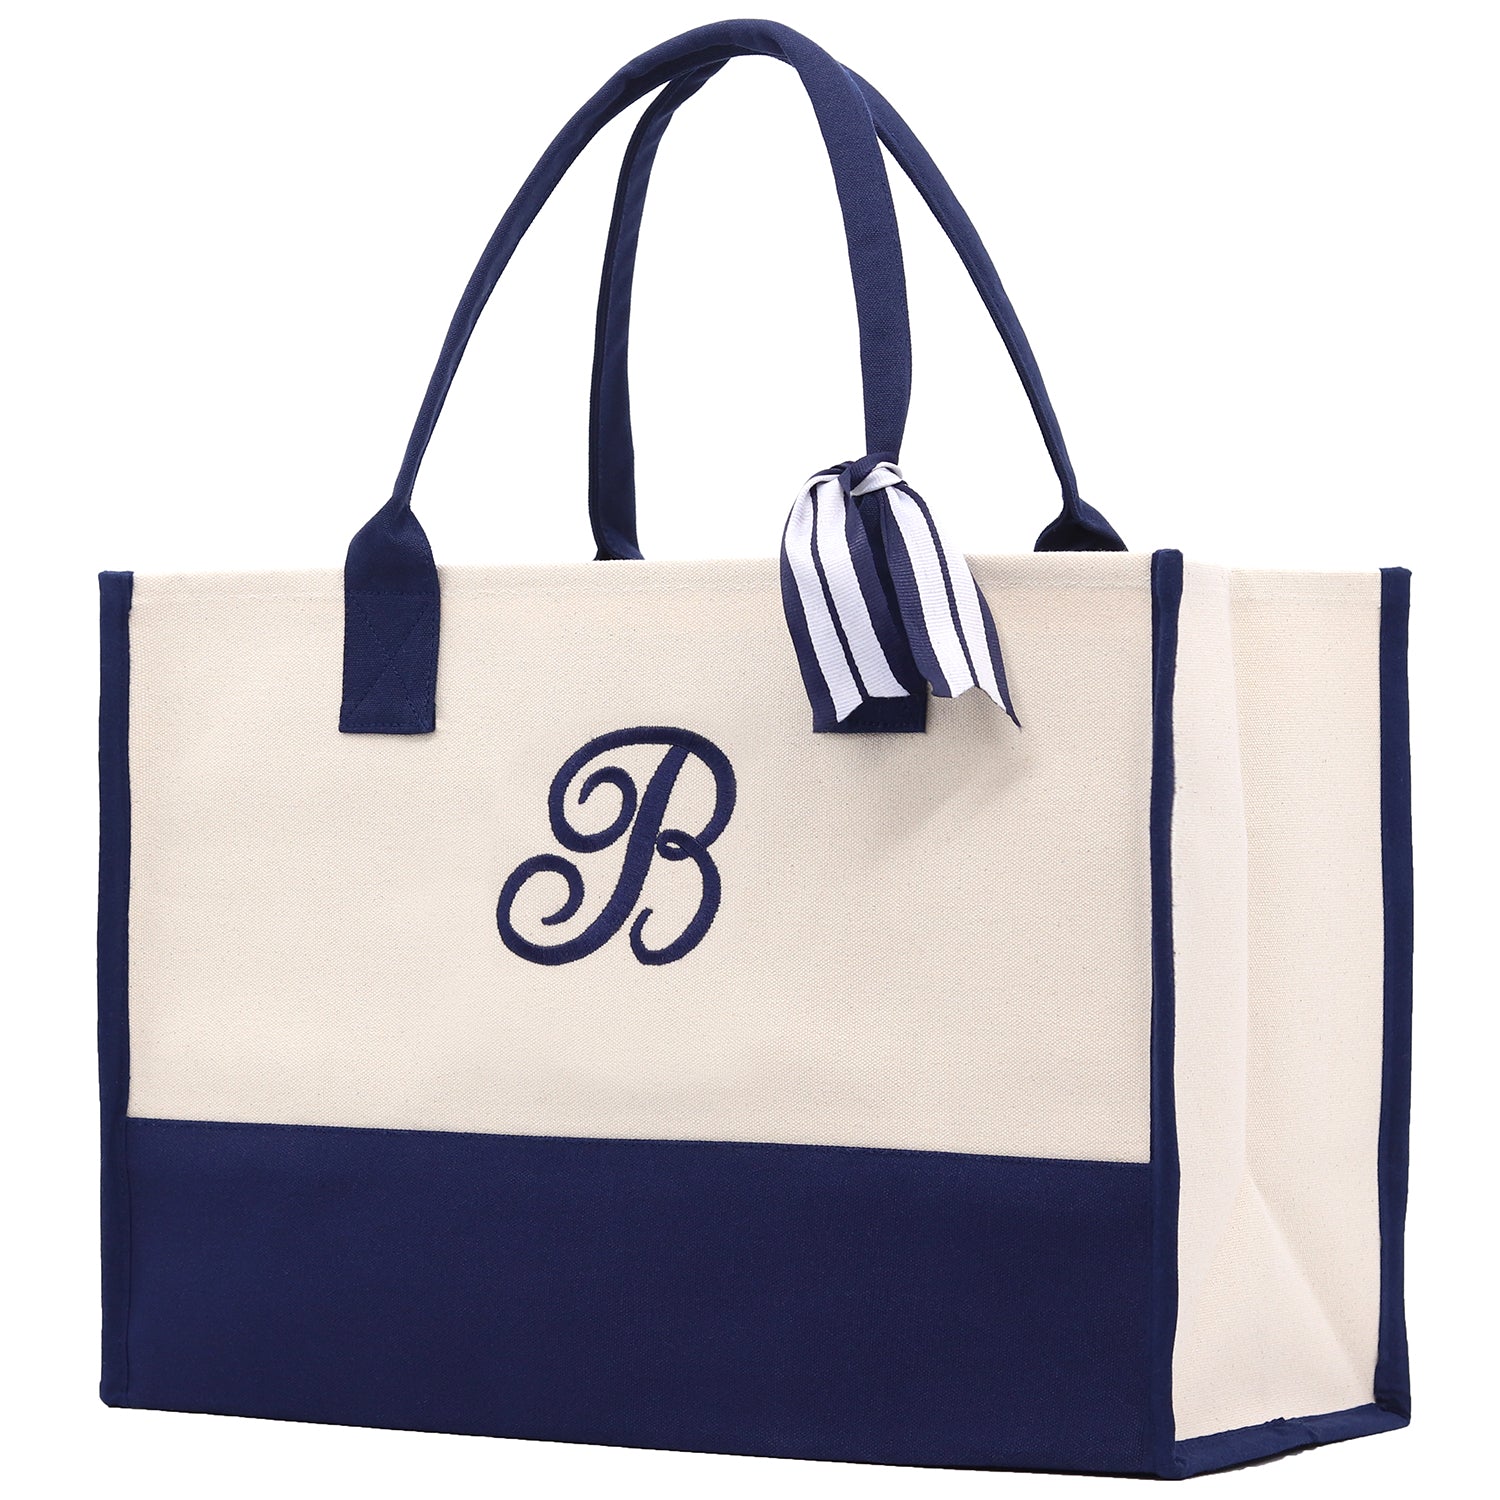 Monogram Tote Bag with 100% Cotton Canvas and a Chic Personalized Monogram Navy Blue Vanessa Rosella Script B 